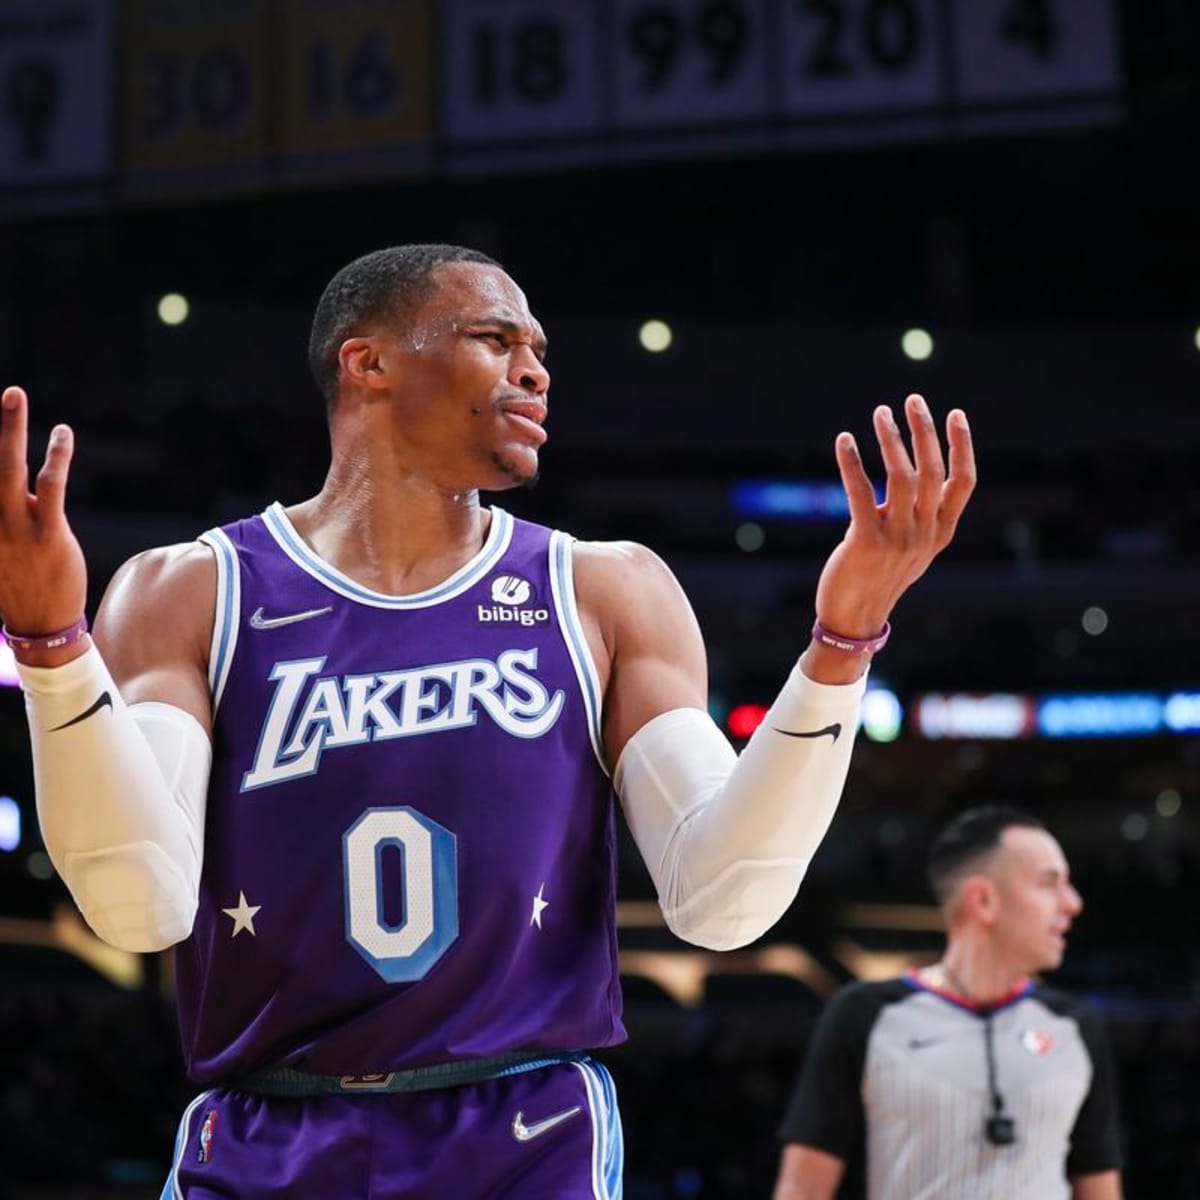 Lakers guard Russell Westbrook doubtful for Wednesday - ABC30 Fresno